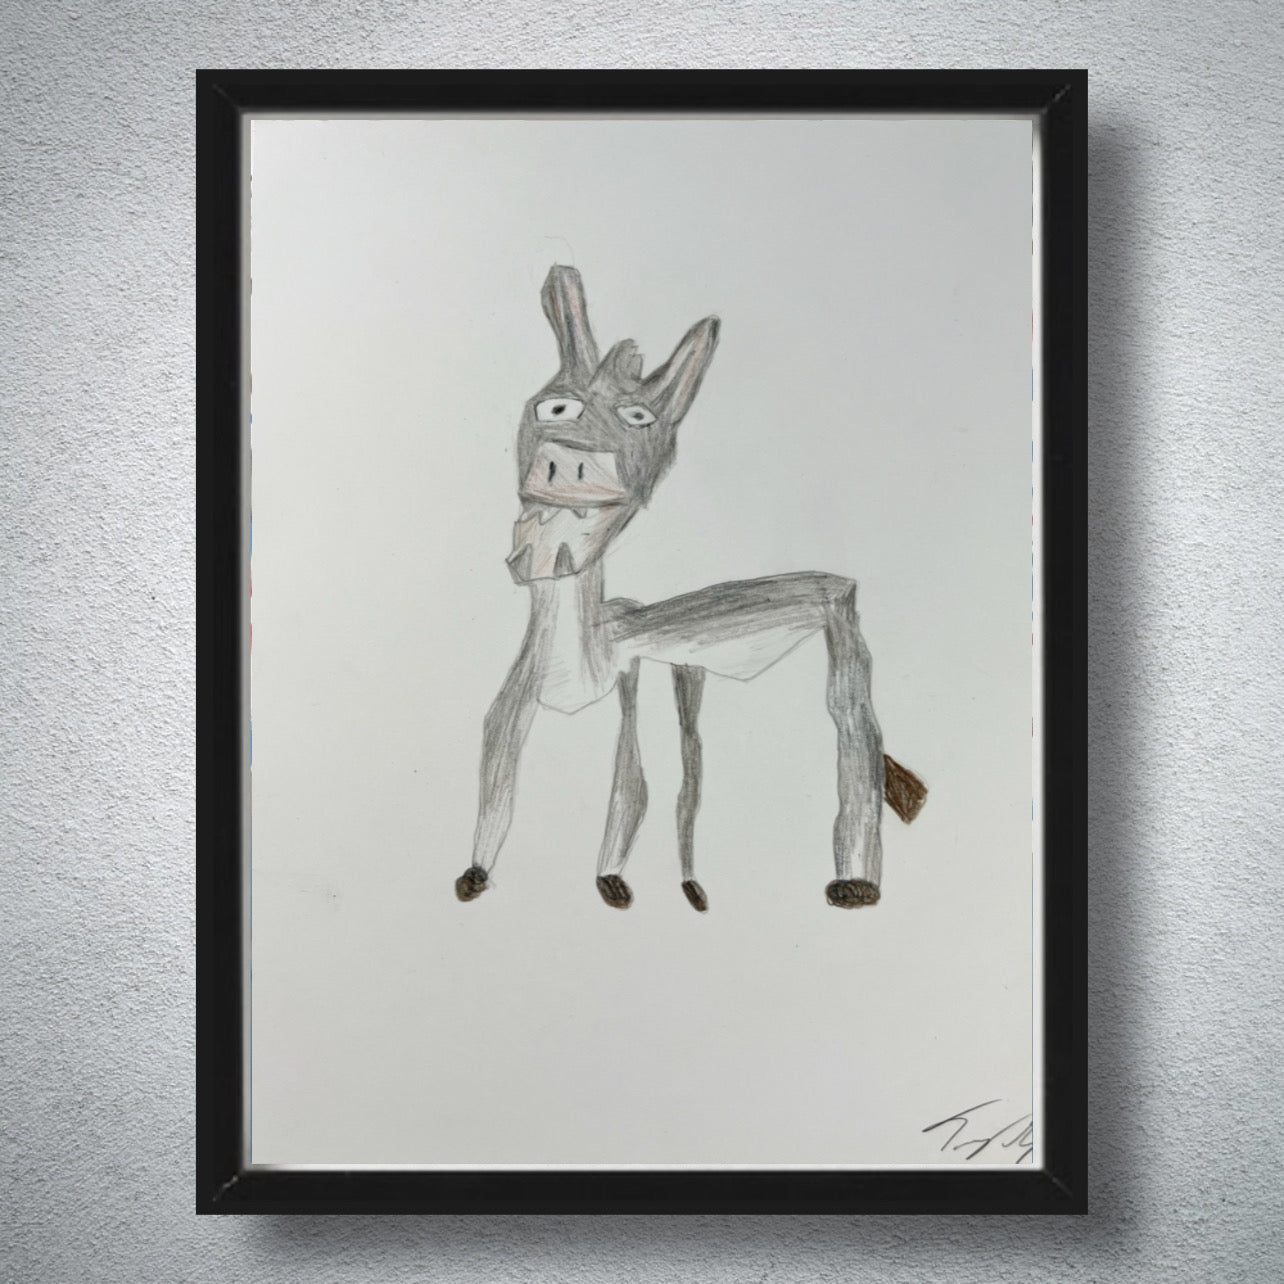 "Gxnna" and "Donkey #2" - Original Drawings bundle (framed) - Tommy Manning Art